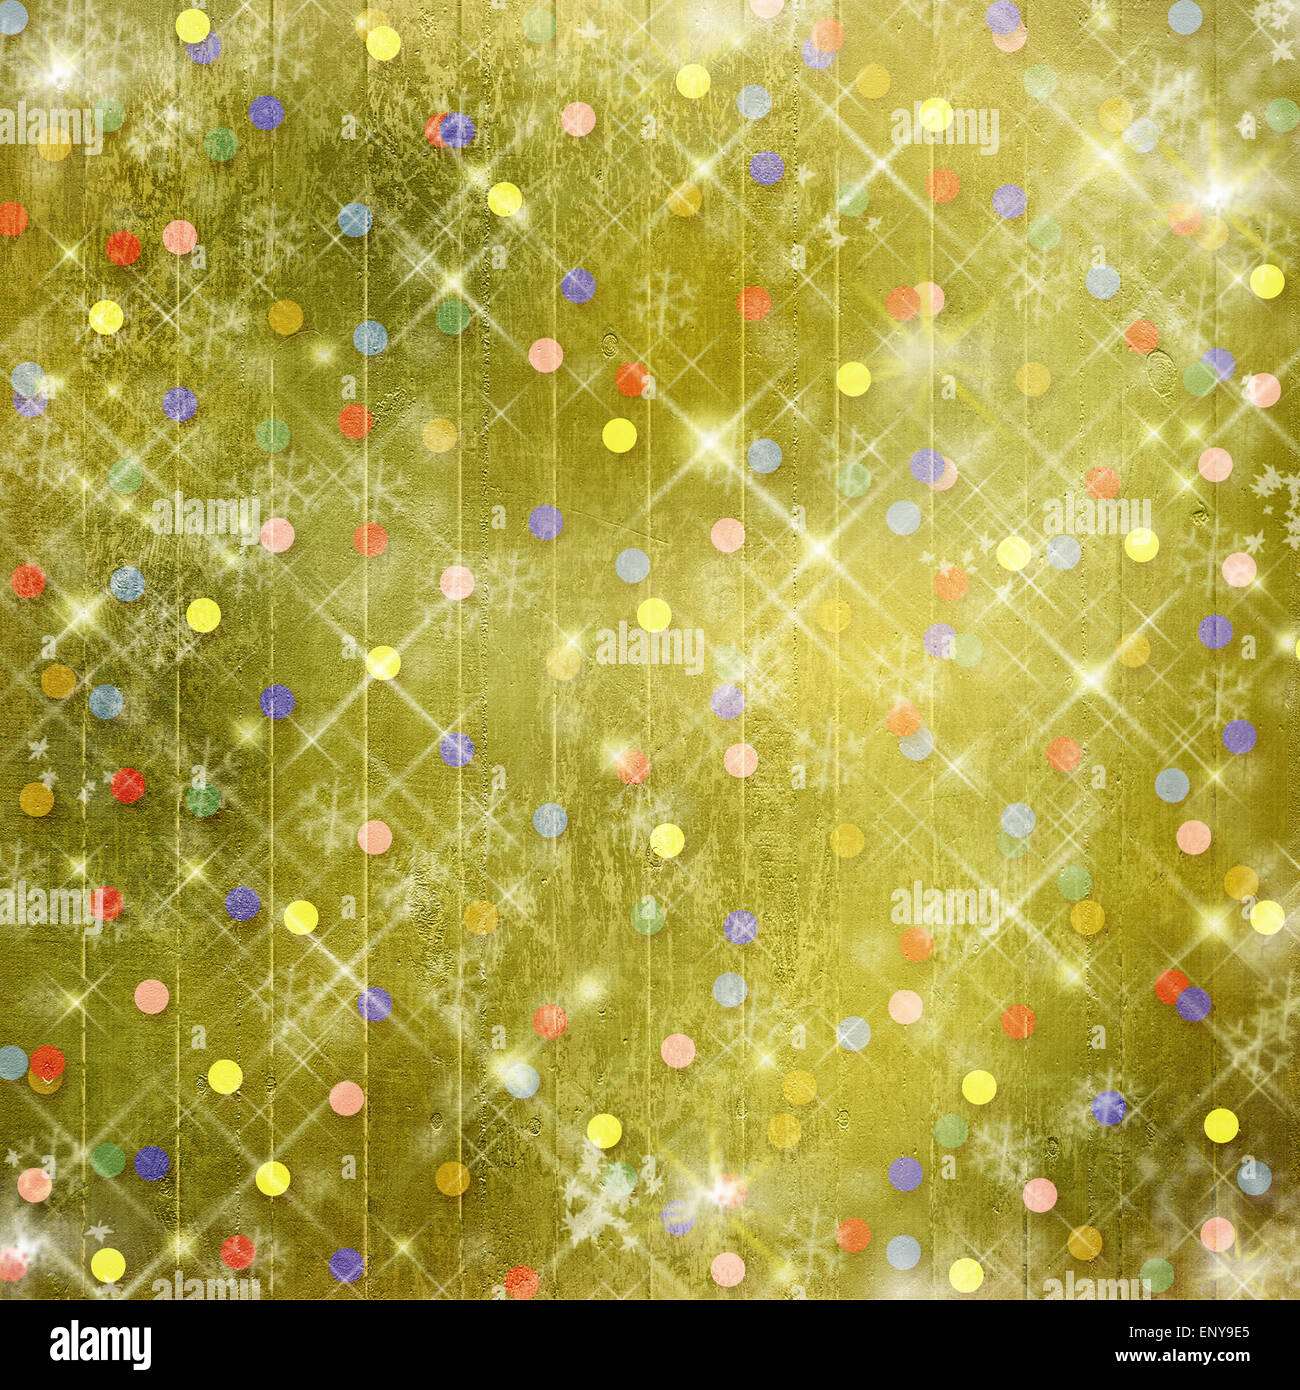 Winter abstract background, christmas stars with snowflakes Stock Photo